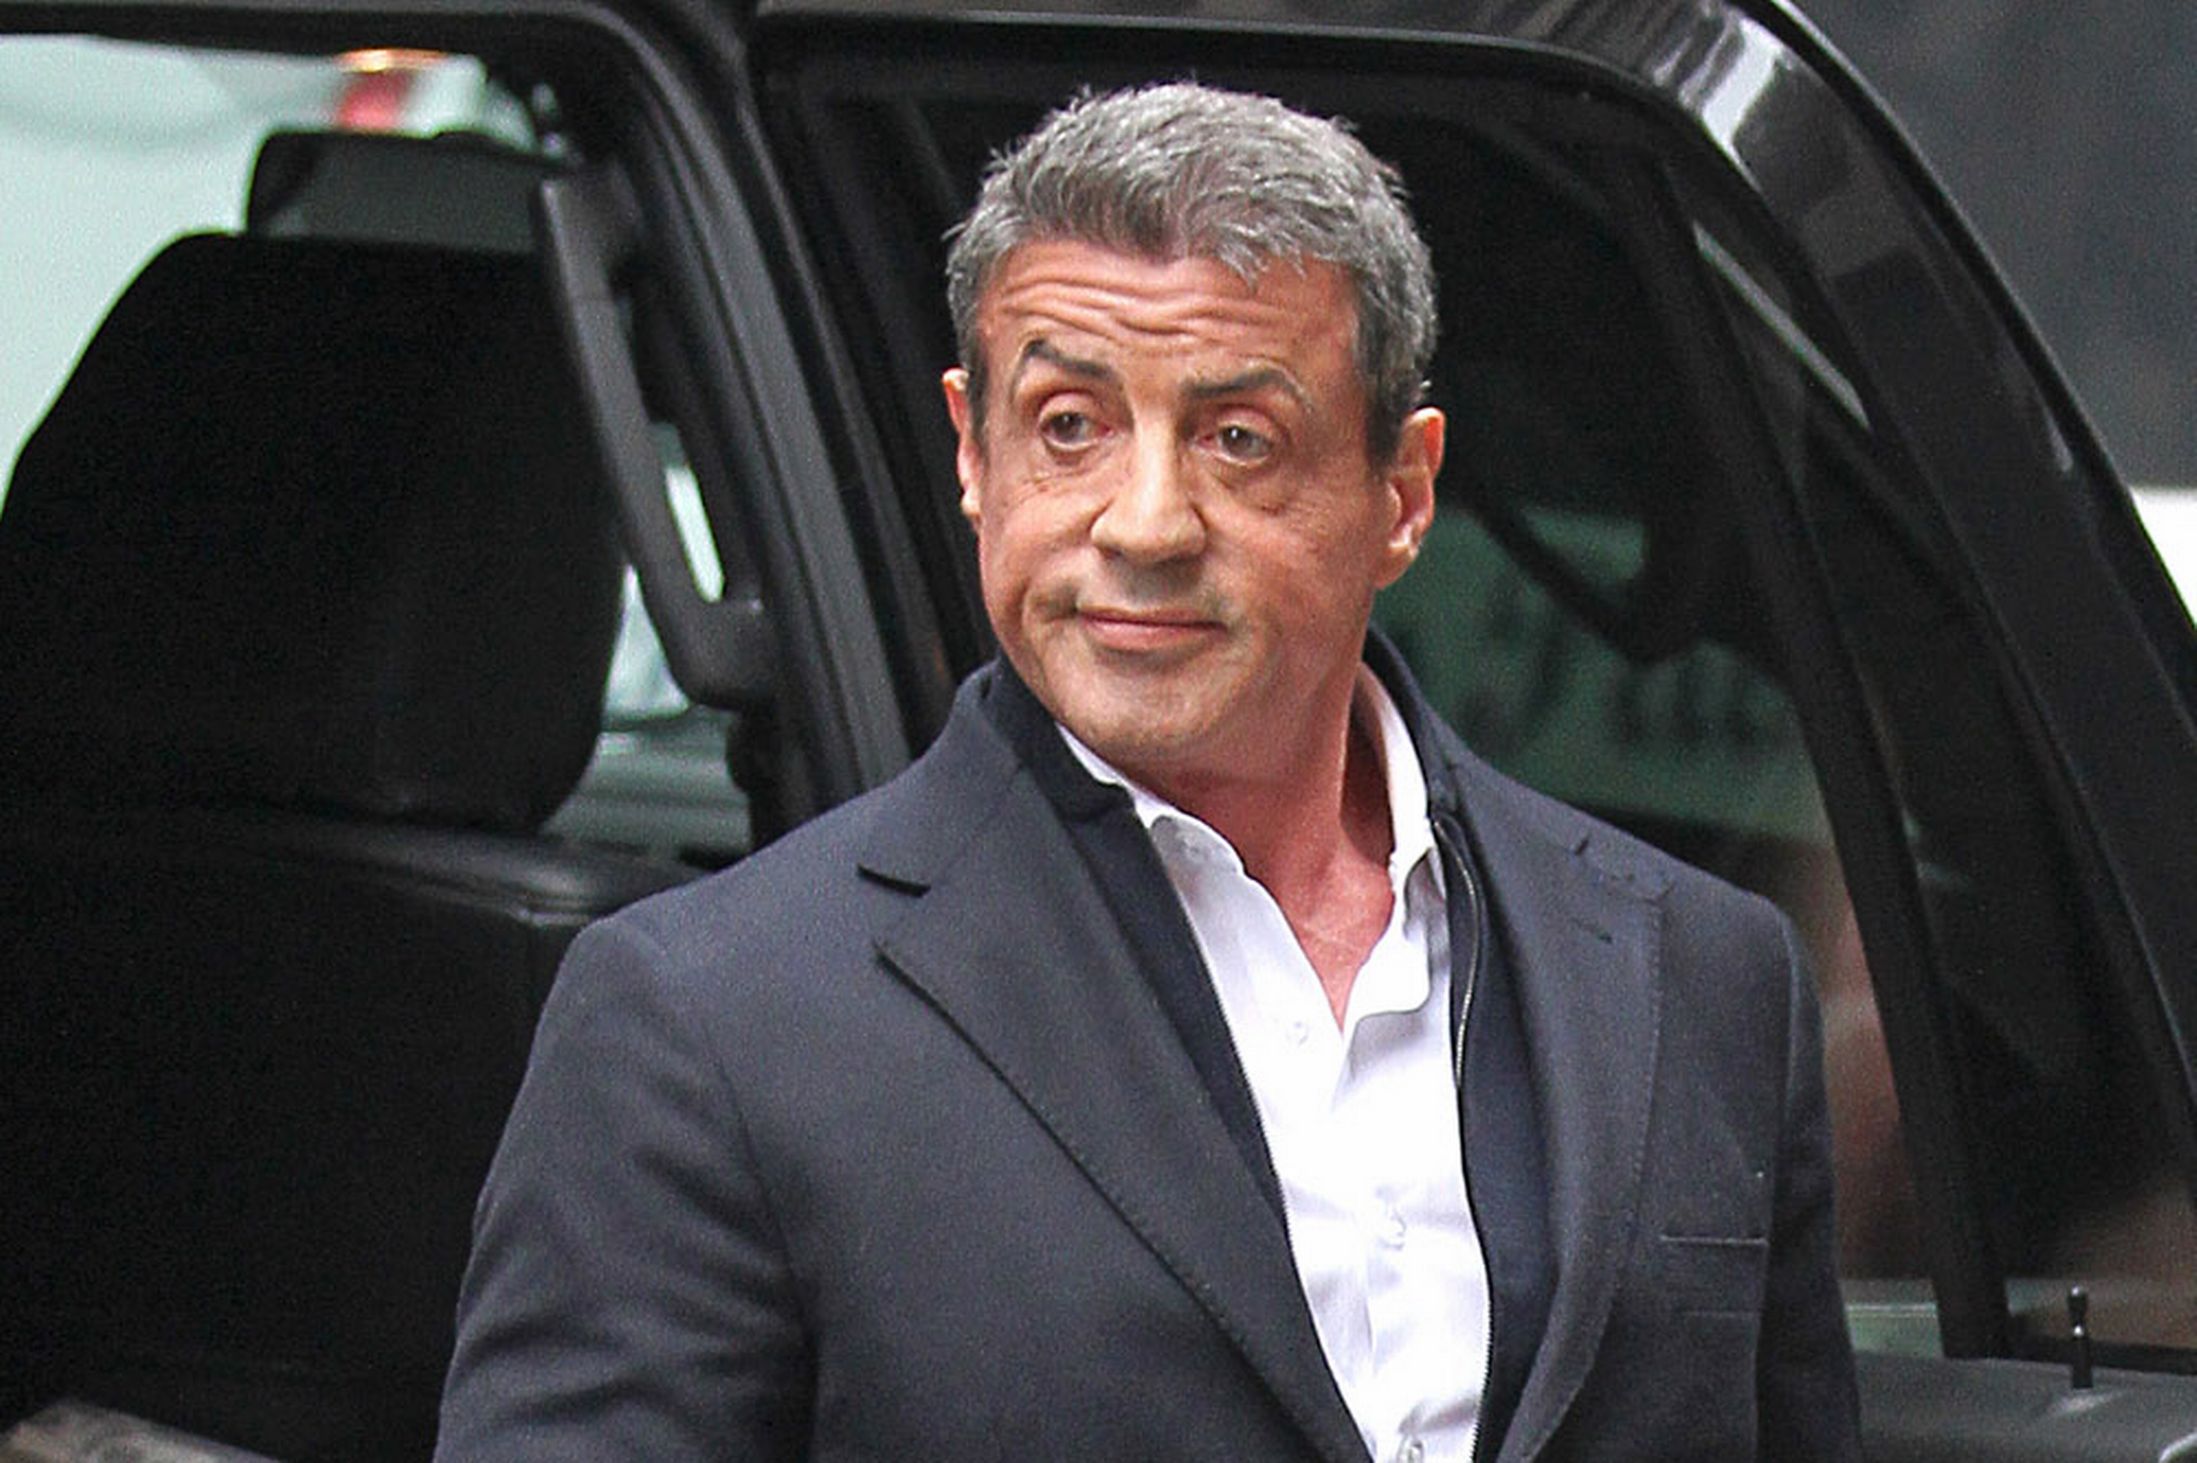 SYLVESTER STALLONE IS WELL AND ALIVE